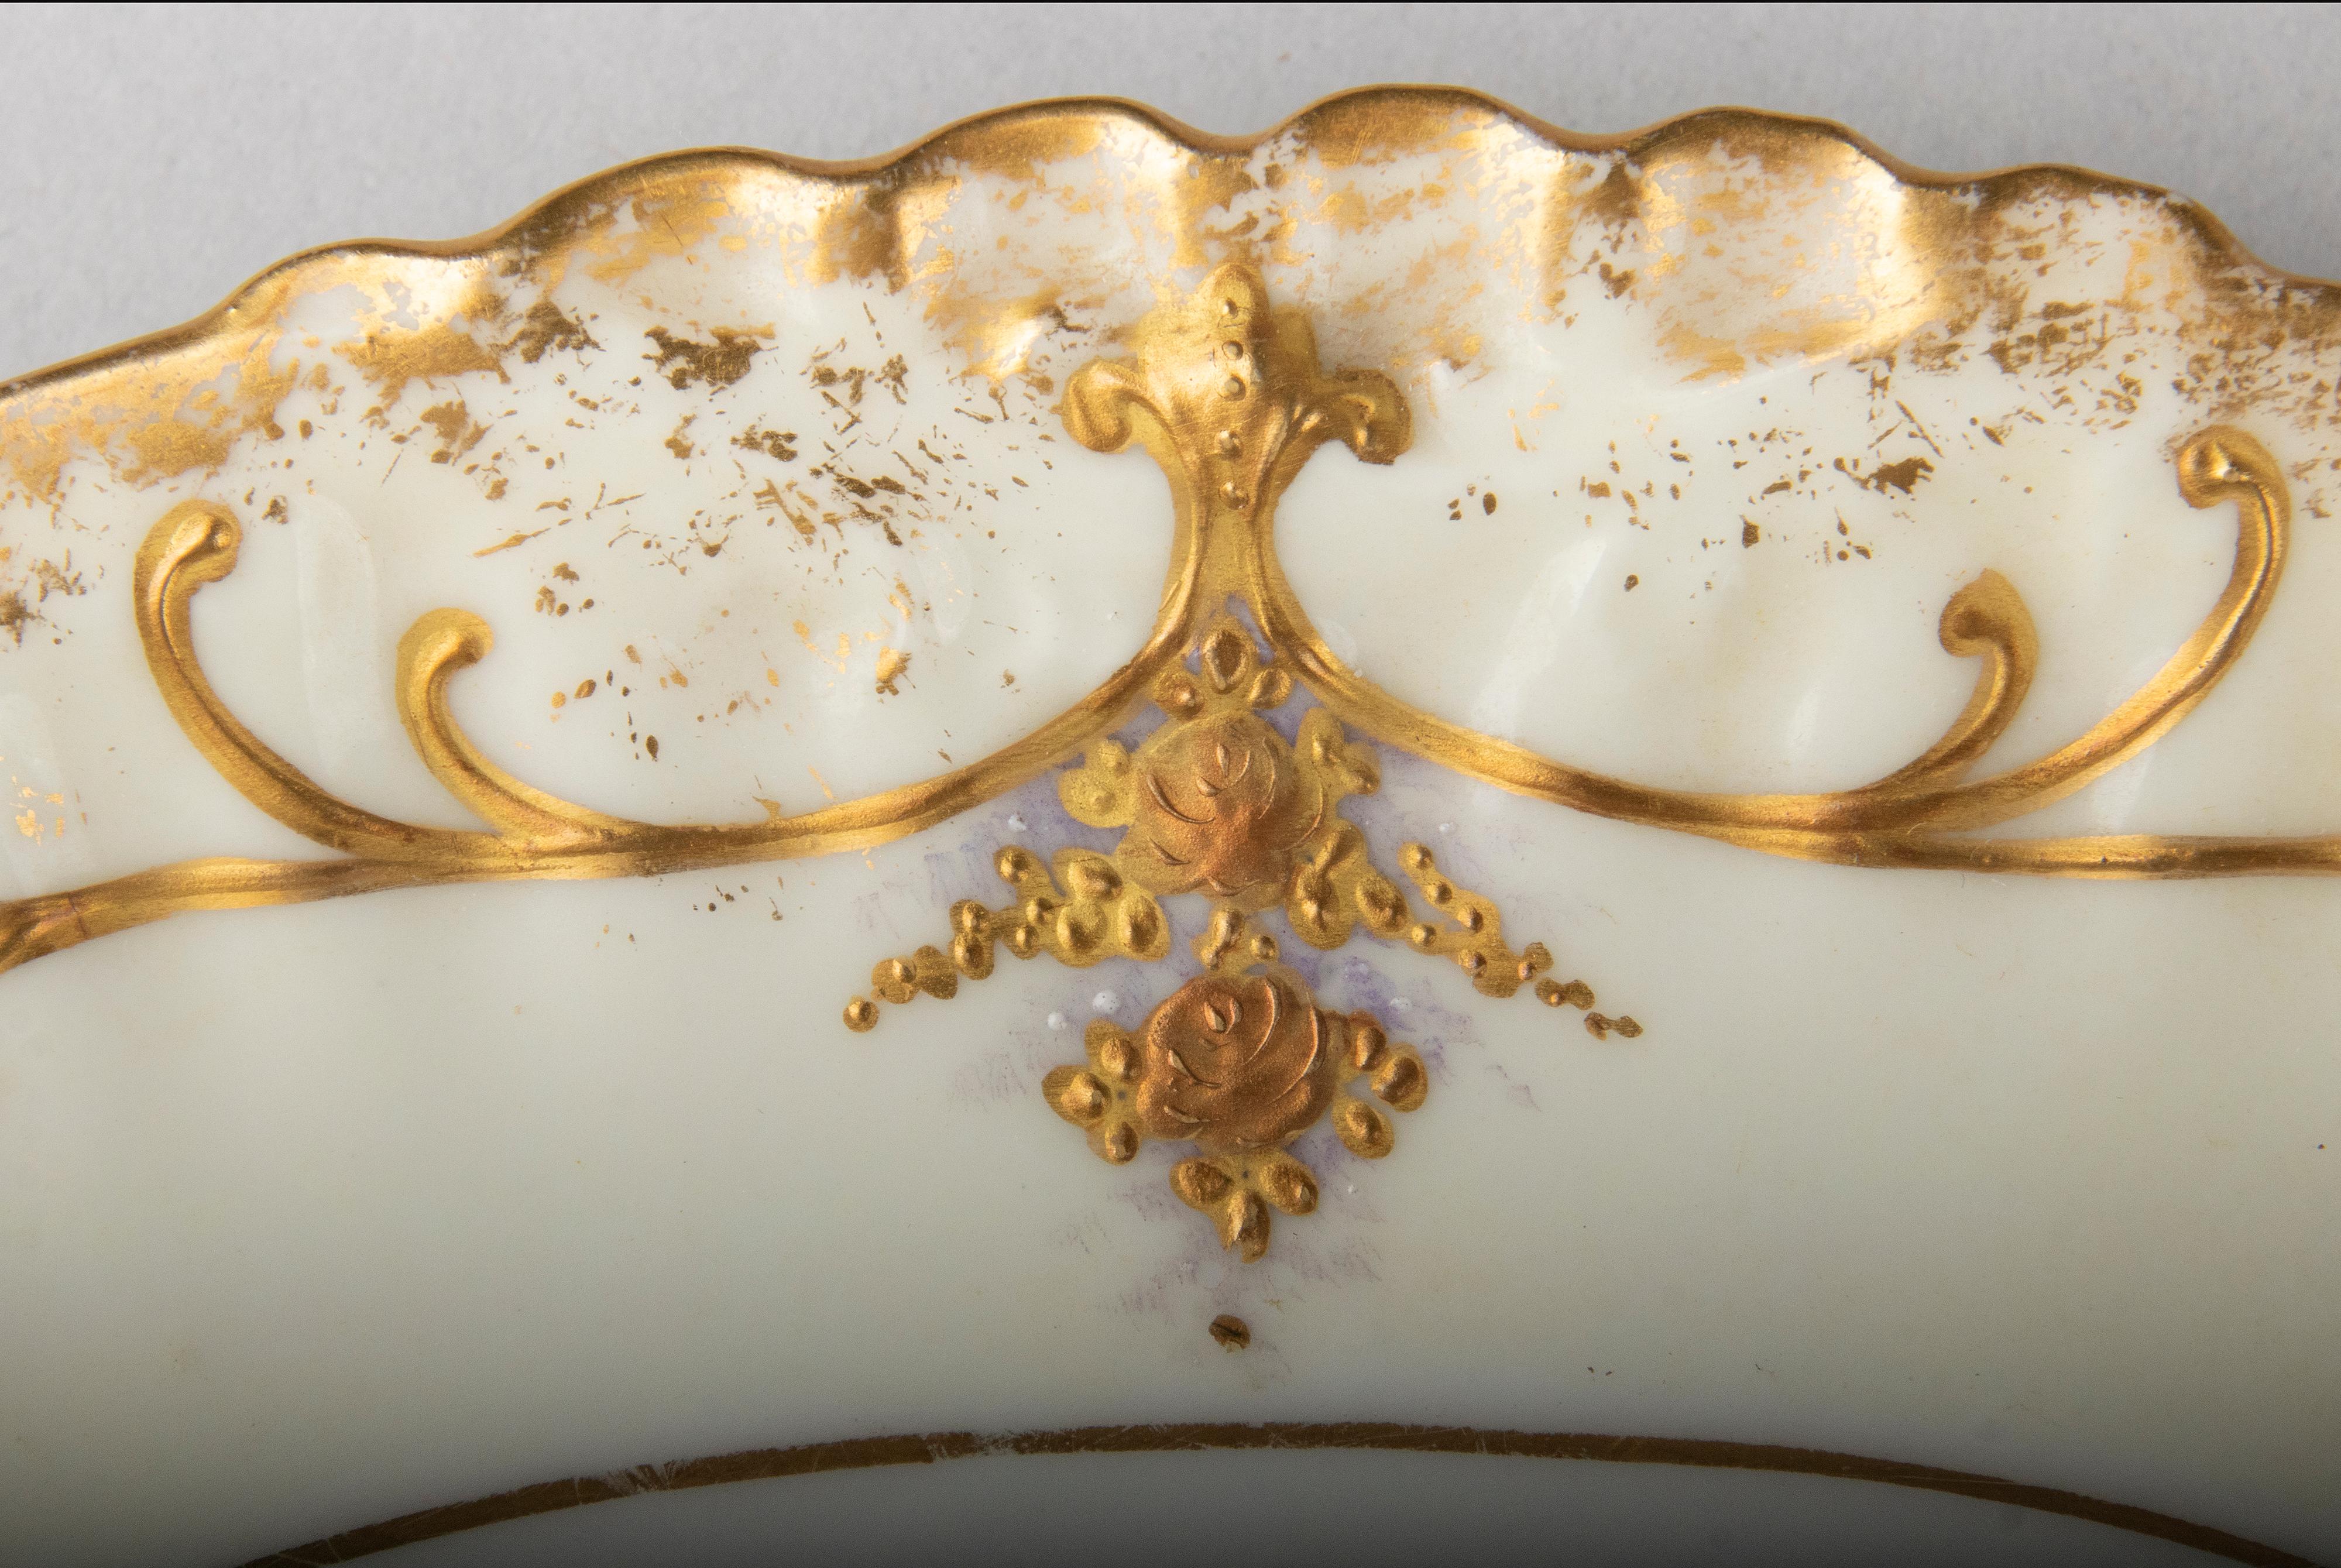 Set of 11 Early 20th Century Porcelain Dessert Plates Gilded by Limoges 5